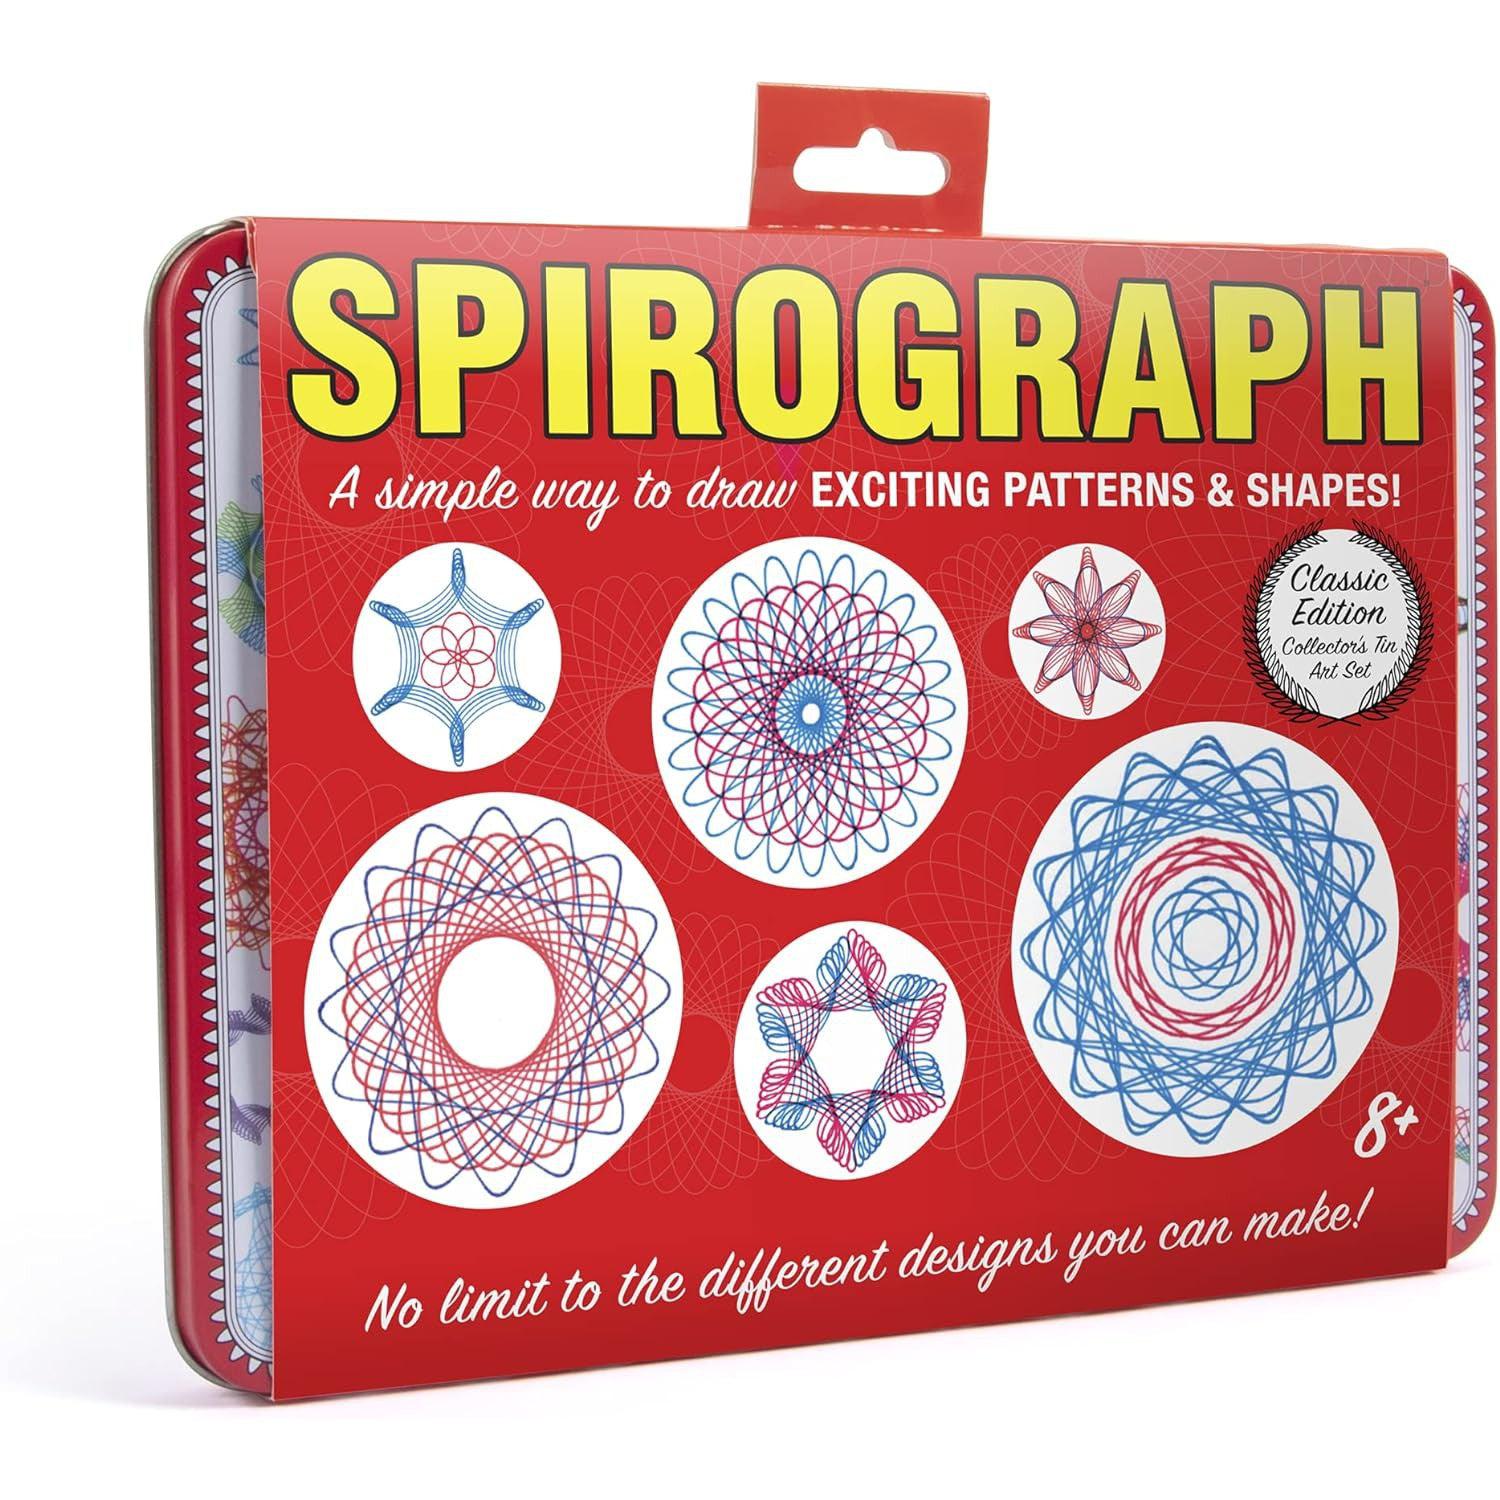 Front of Spirograph package showing sample patterns and shapes